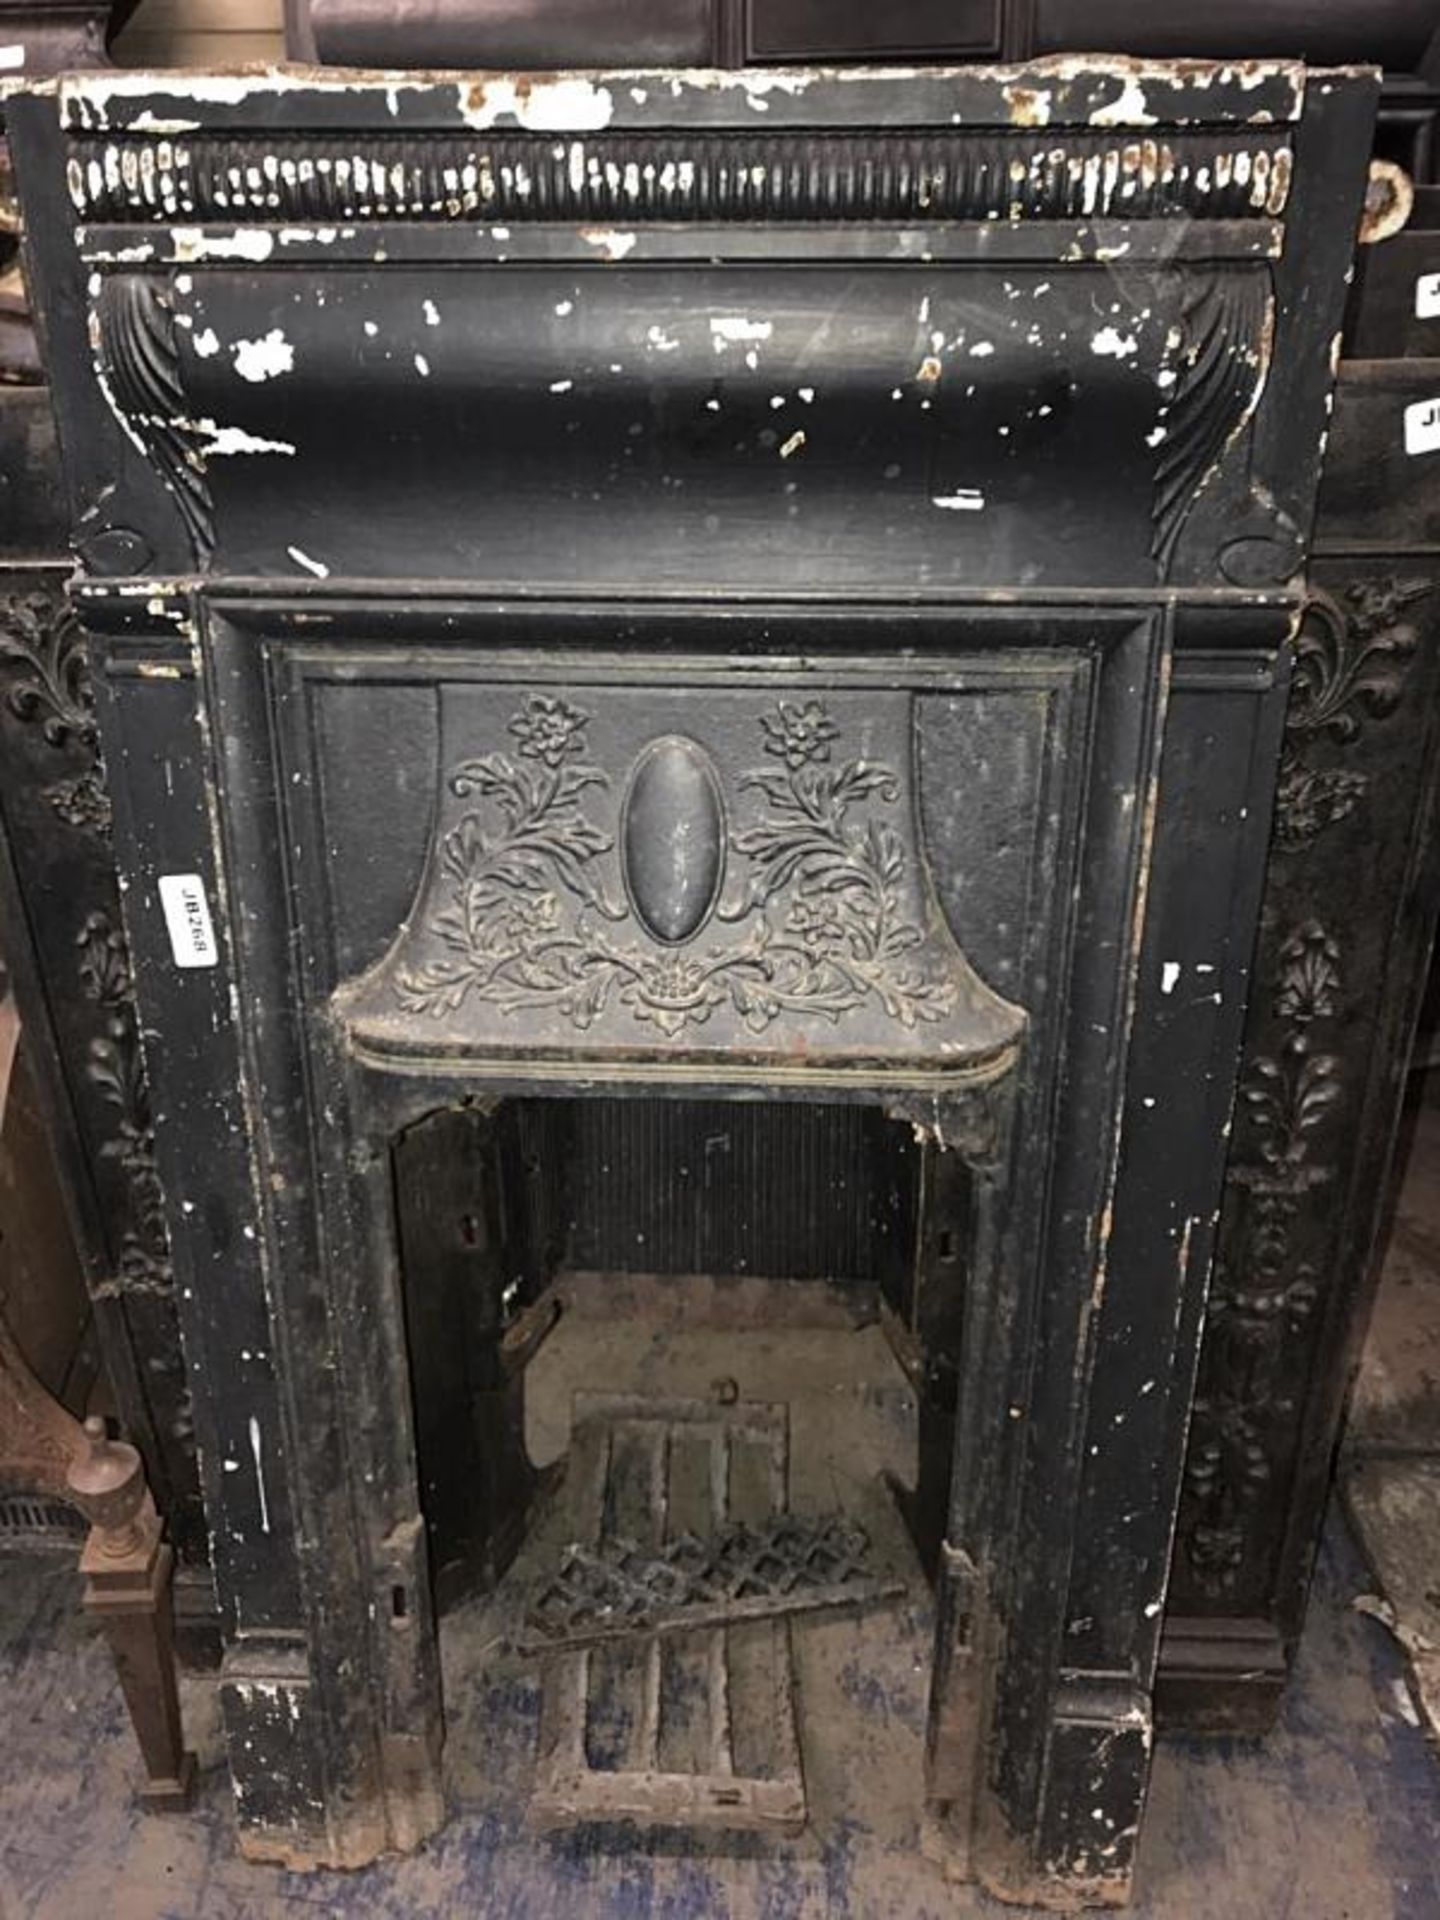 1 x Stunning Antique Victorian Cast Iron Fire Surround With Ornate Insert - Dimensions: Height 107cm